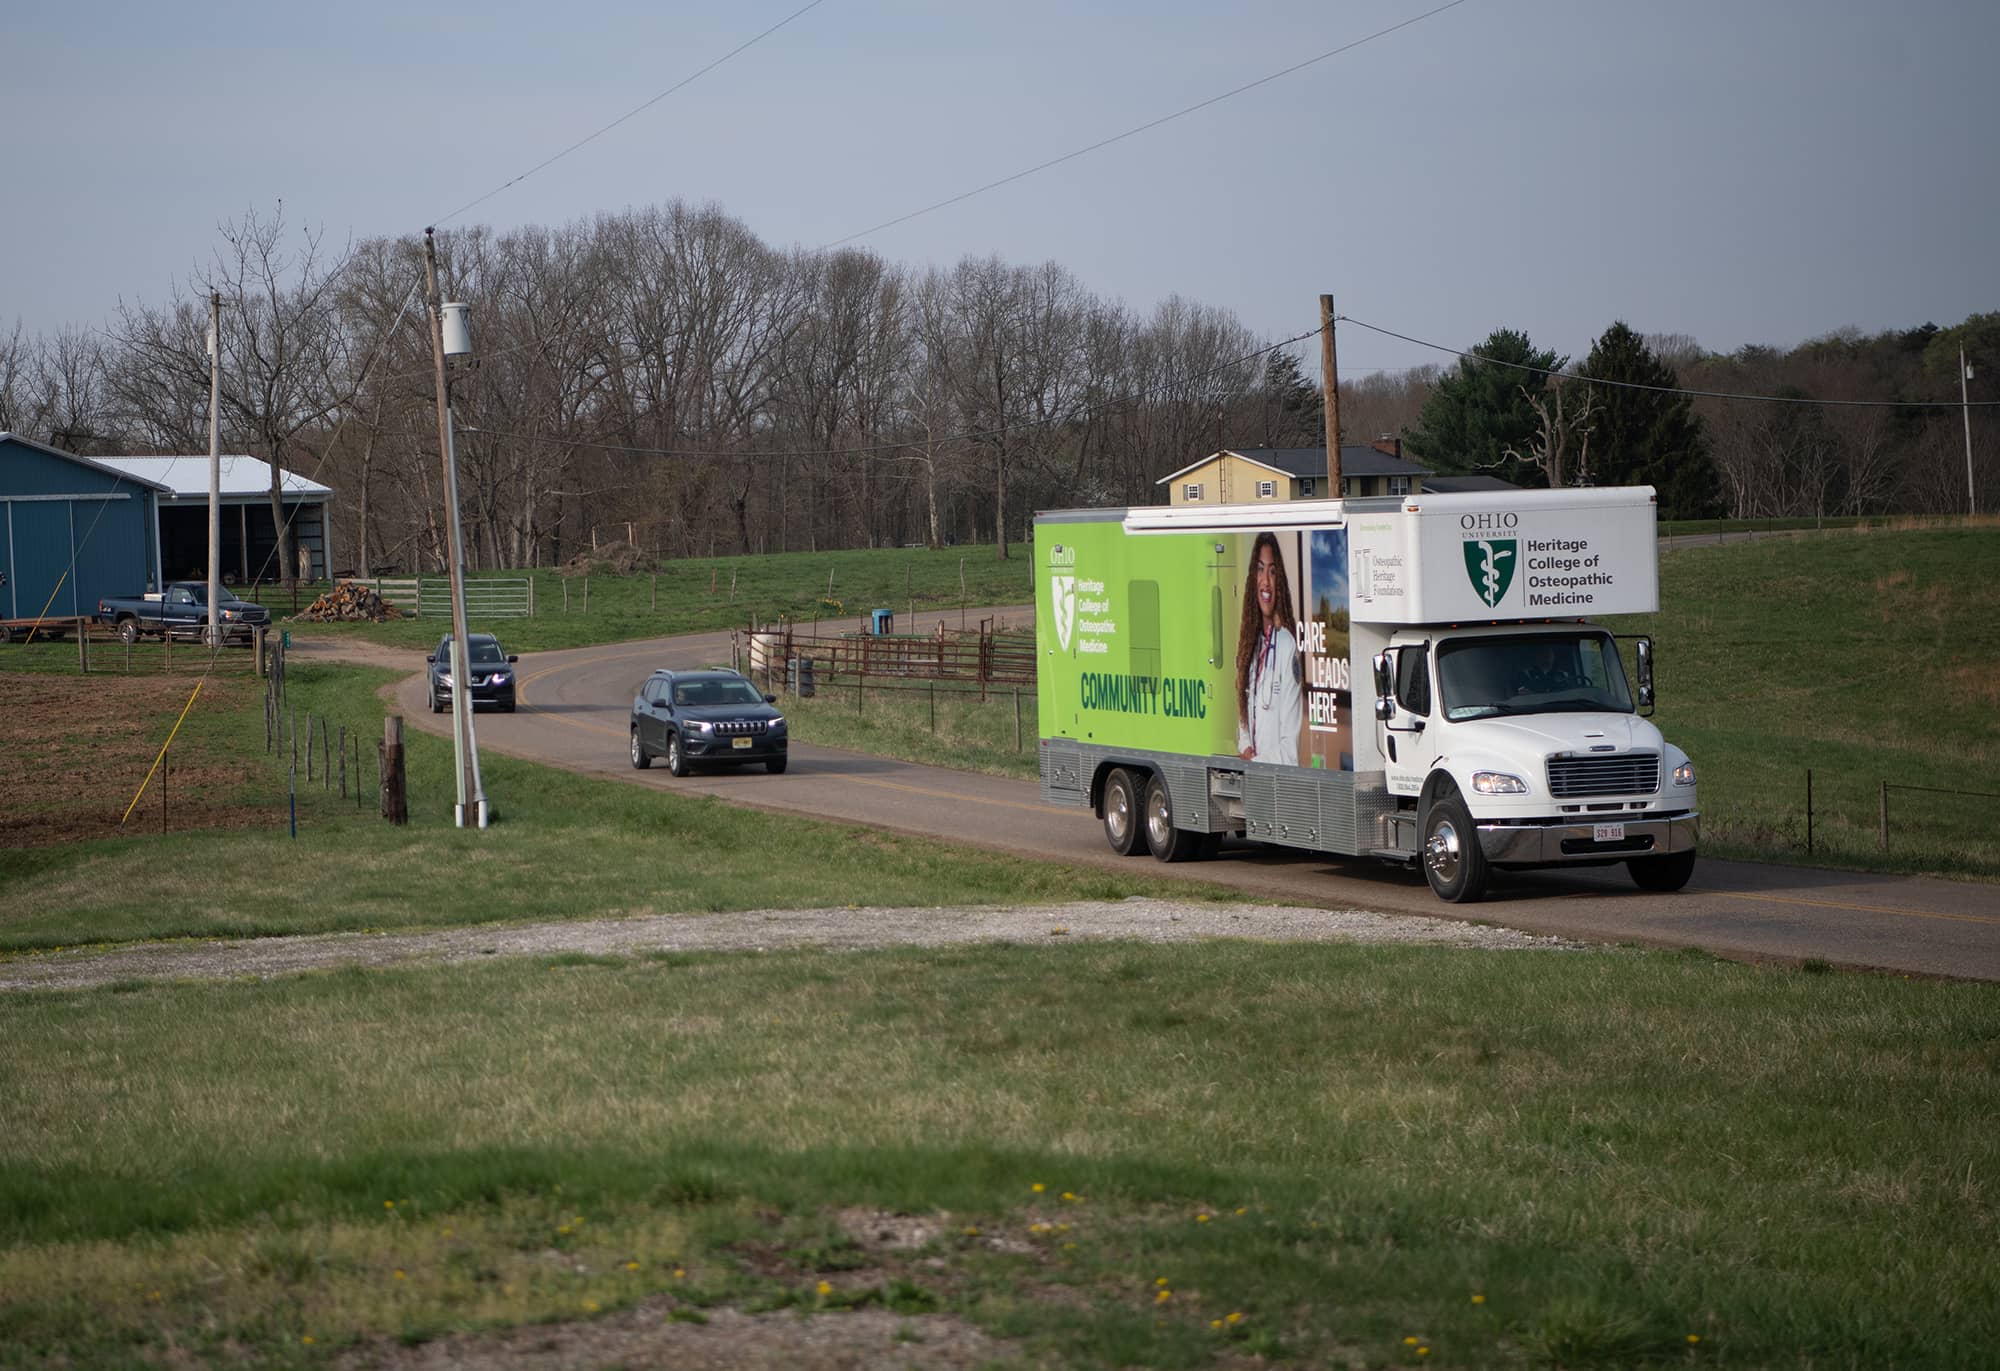 Each year, two 40-foot mobile clinics from the Heritage College's Community Health Programs travel throughout 24 Ohio counties, providing clinics at churches, community centers, worksites, schools and more.